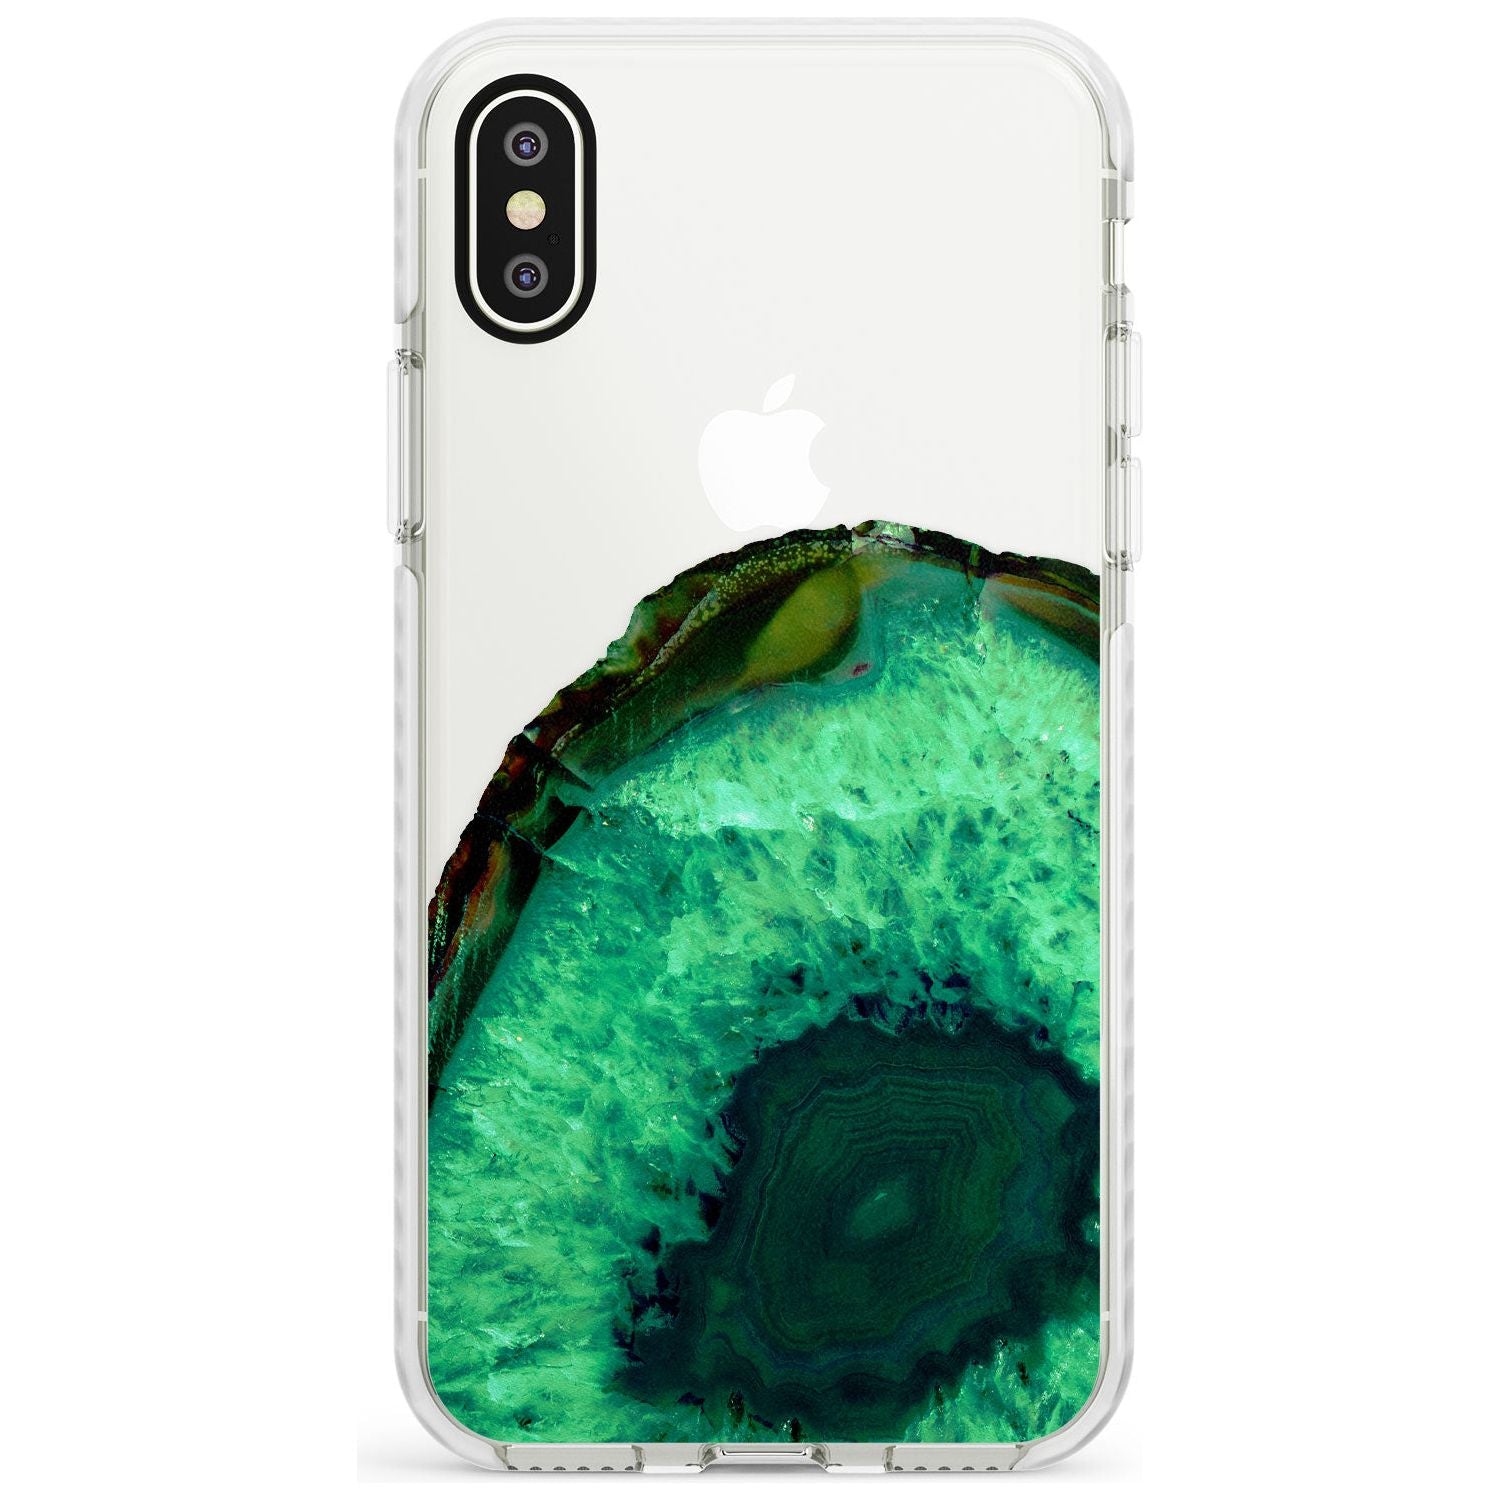 Emerald Green Gemstone Crystal Clear Design Impact Phone Case for iPhone X XS Max XR